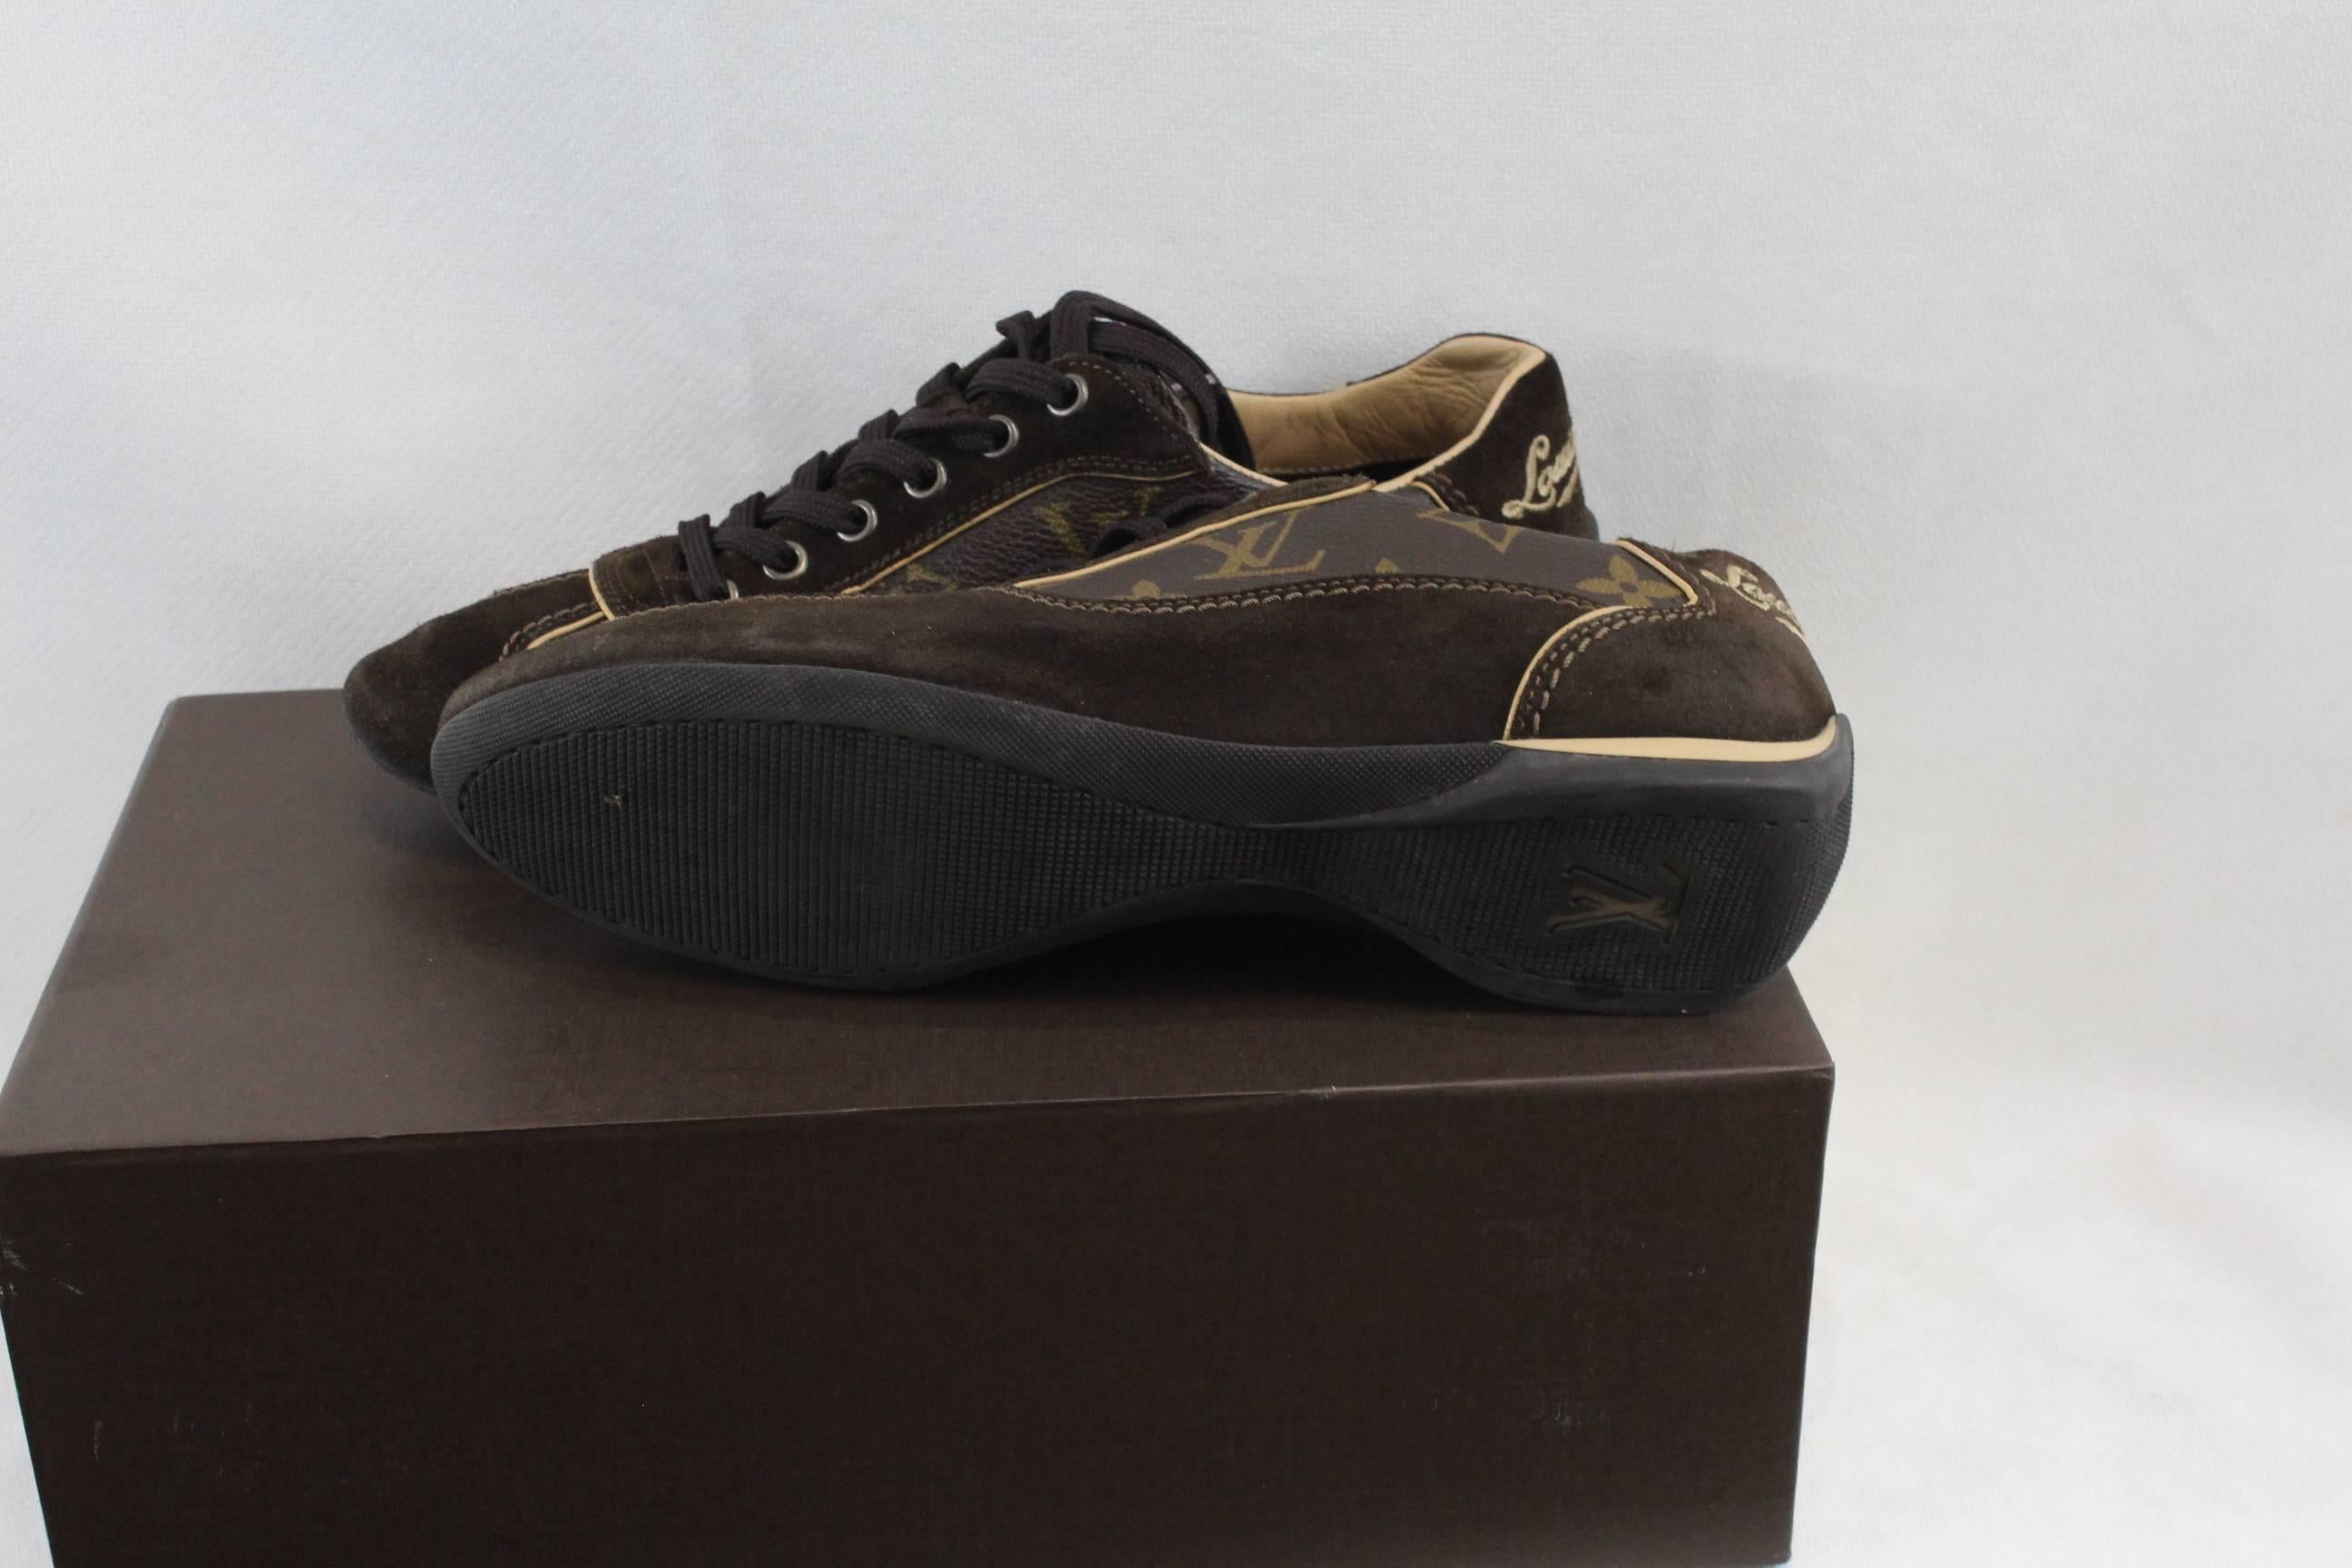 Nice Lousi Vuitton sneakers in small size (european 34)

good condition

Sold with box and extra laces